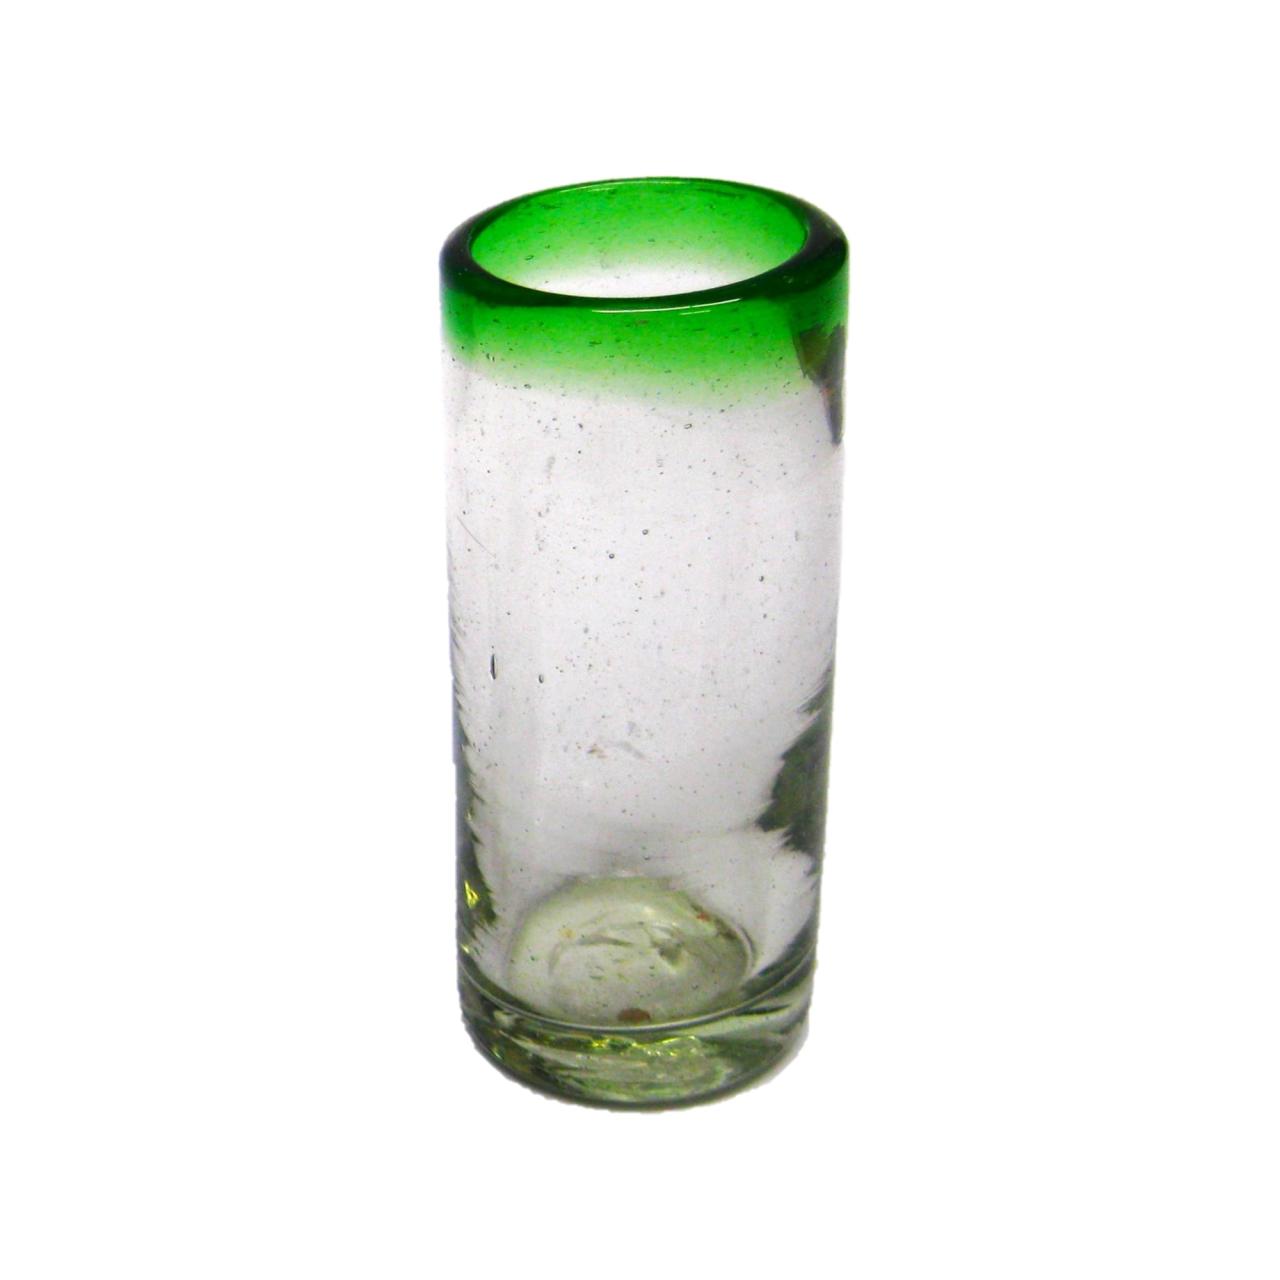 MEXICAN GLASSWARE / Emerald Green Rim 2 oz Tequila Shot Glasses (set of 6) / These shot glasses bordered in emerald green are perfect for sipping your favourite tequila or any other liquor.